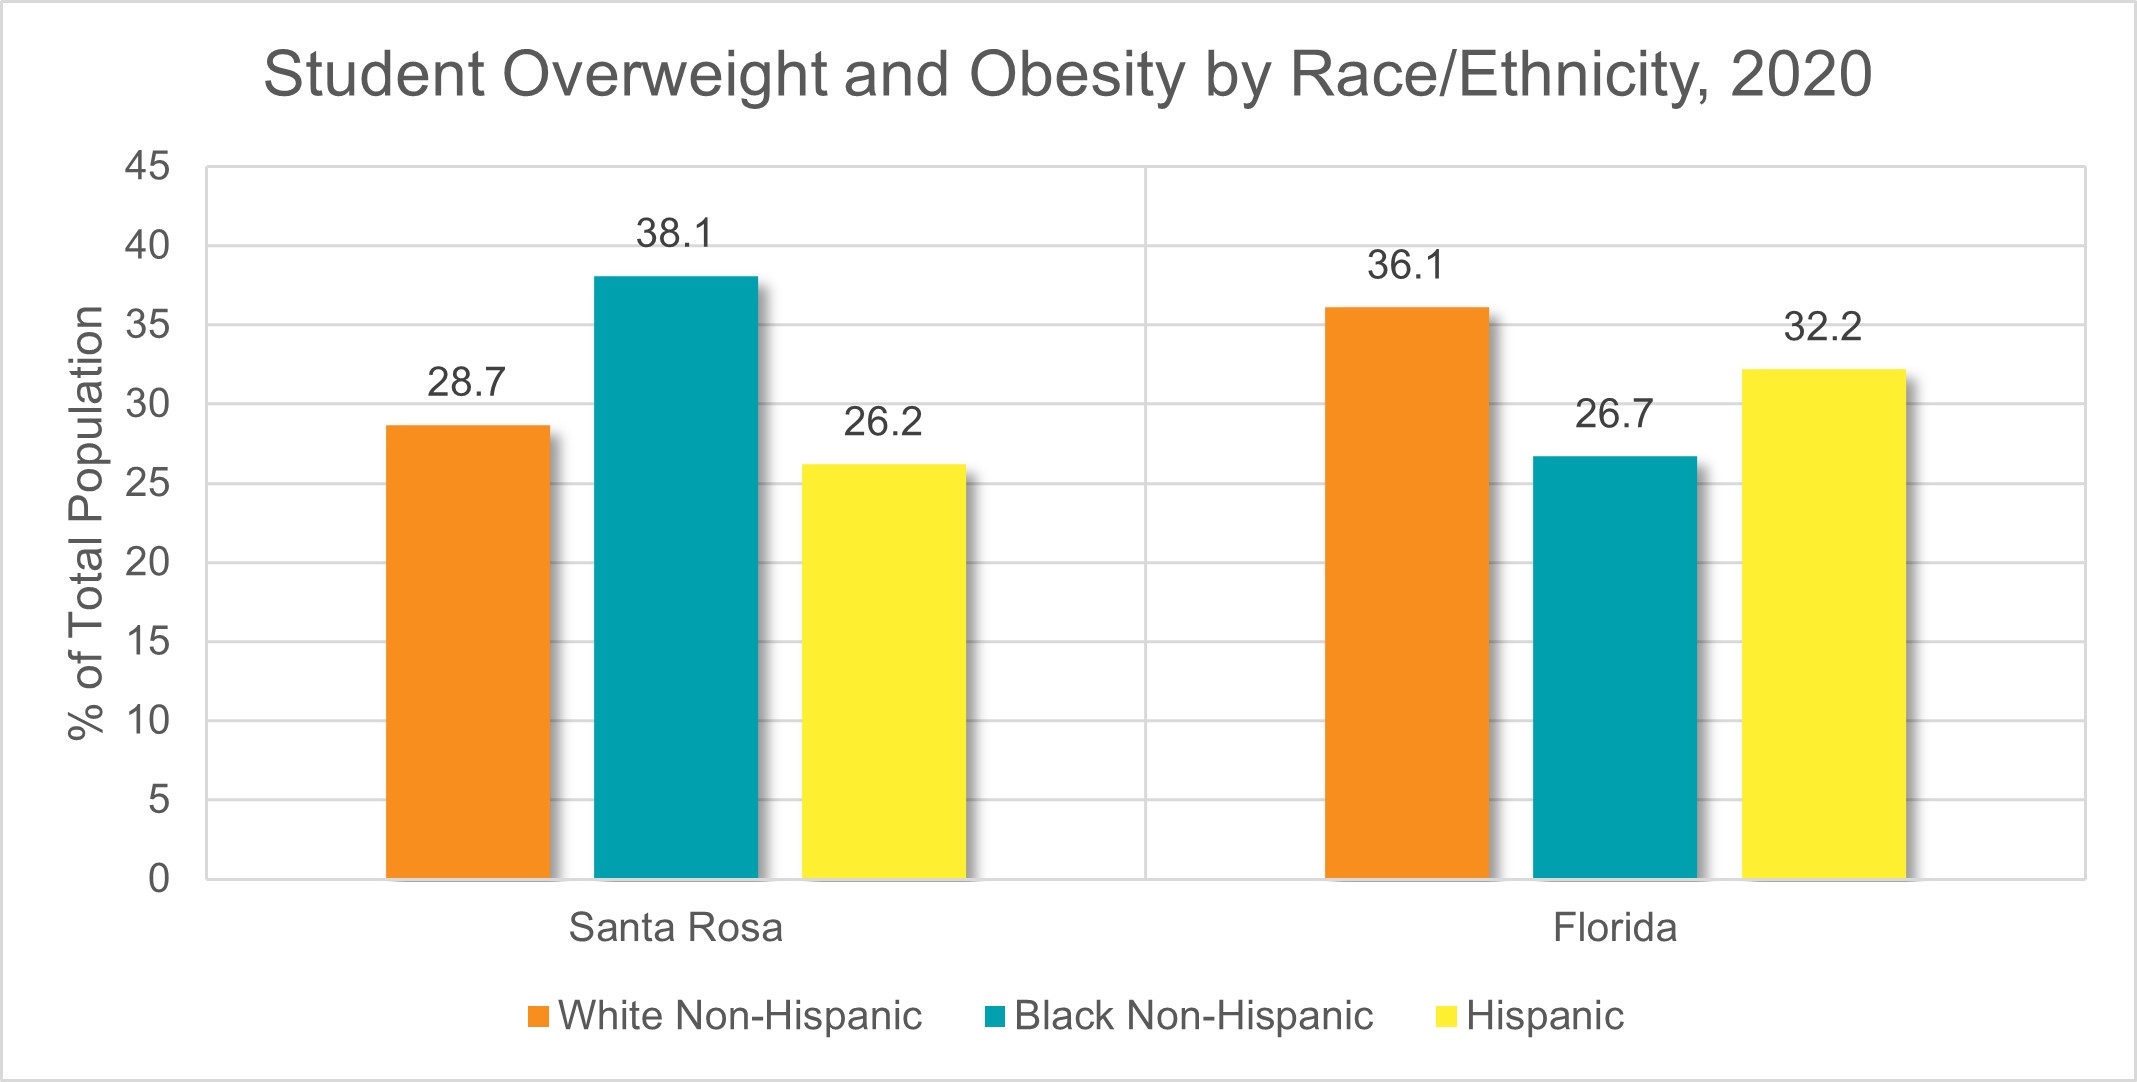 Student Overweight and Obesity by Race/Ethnicity, 2030